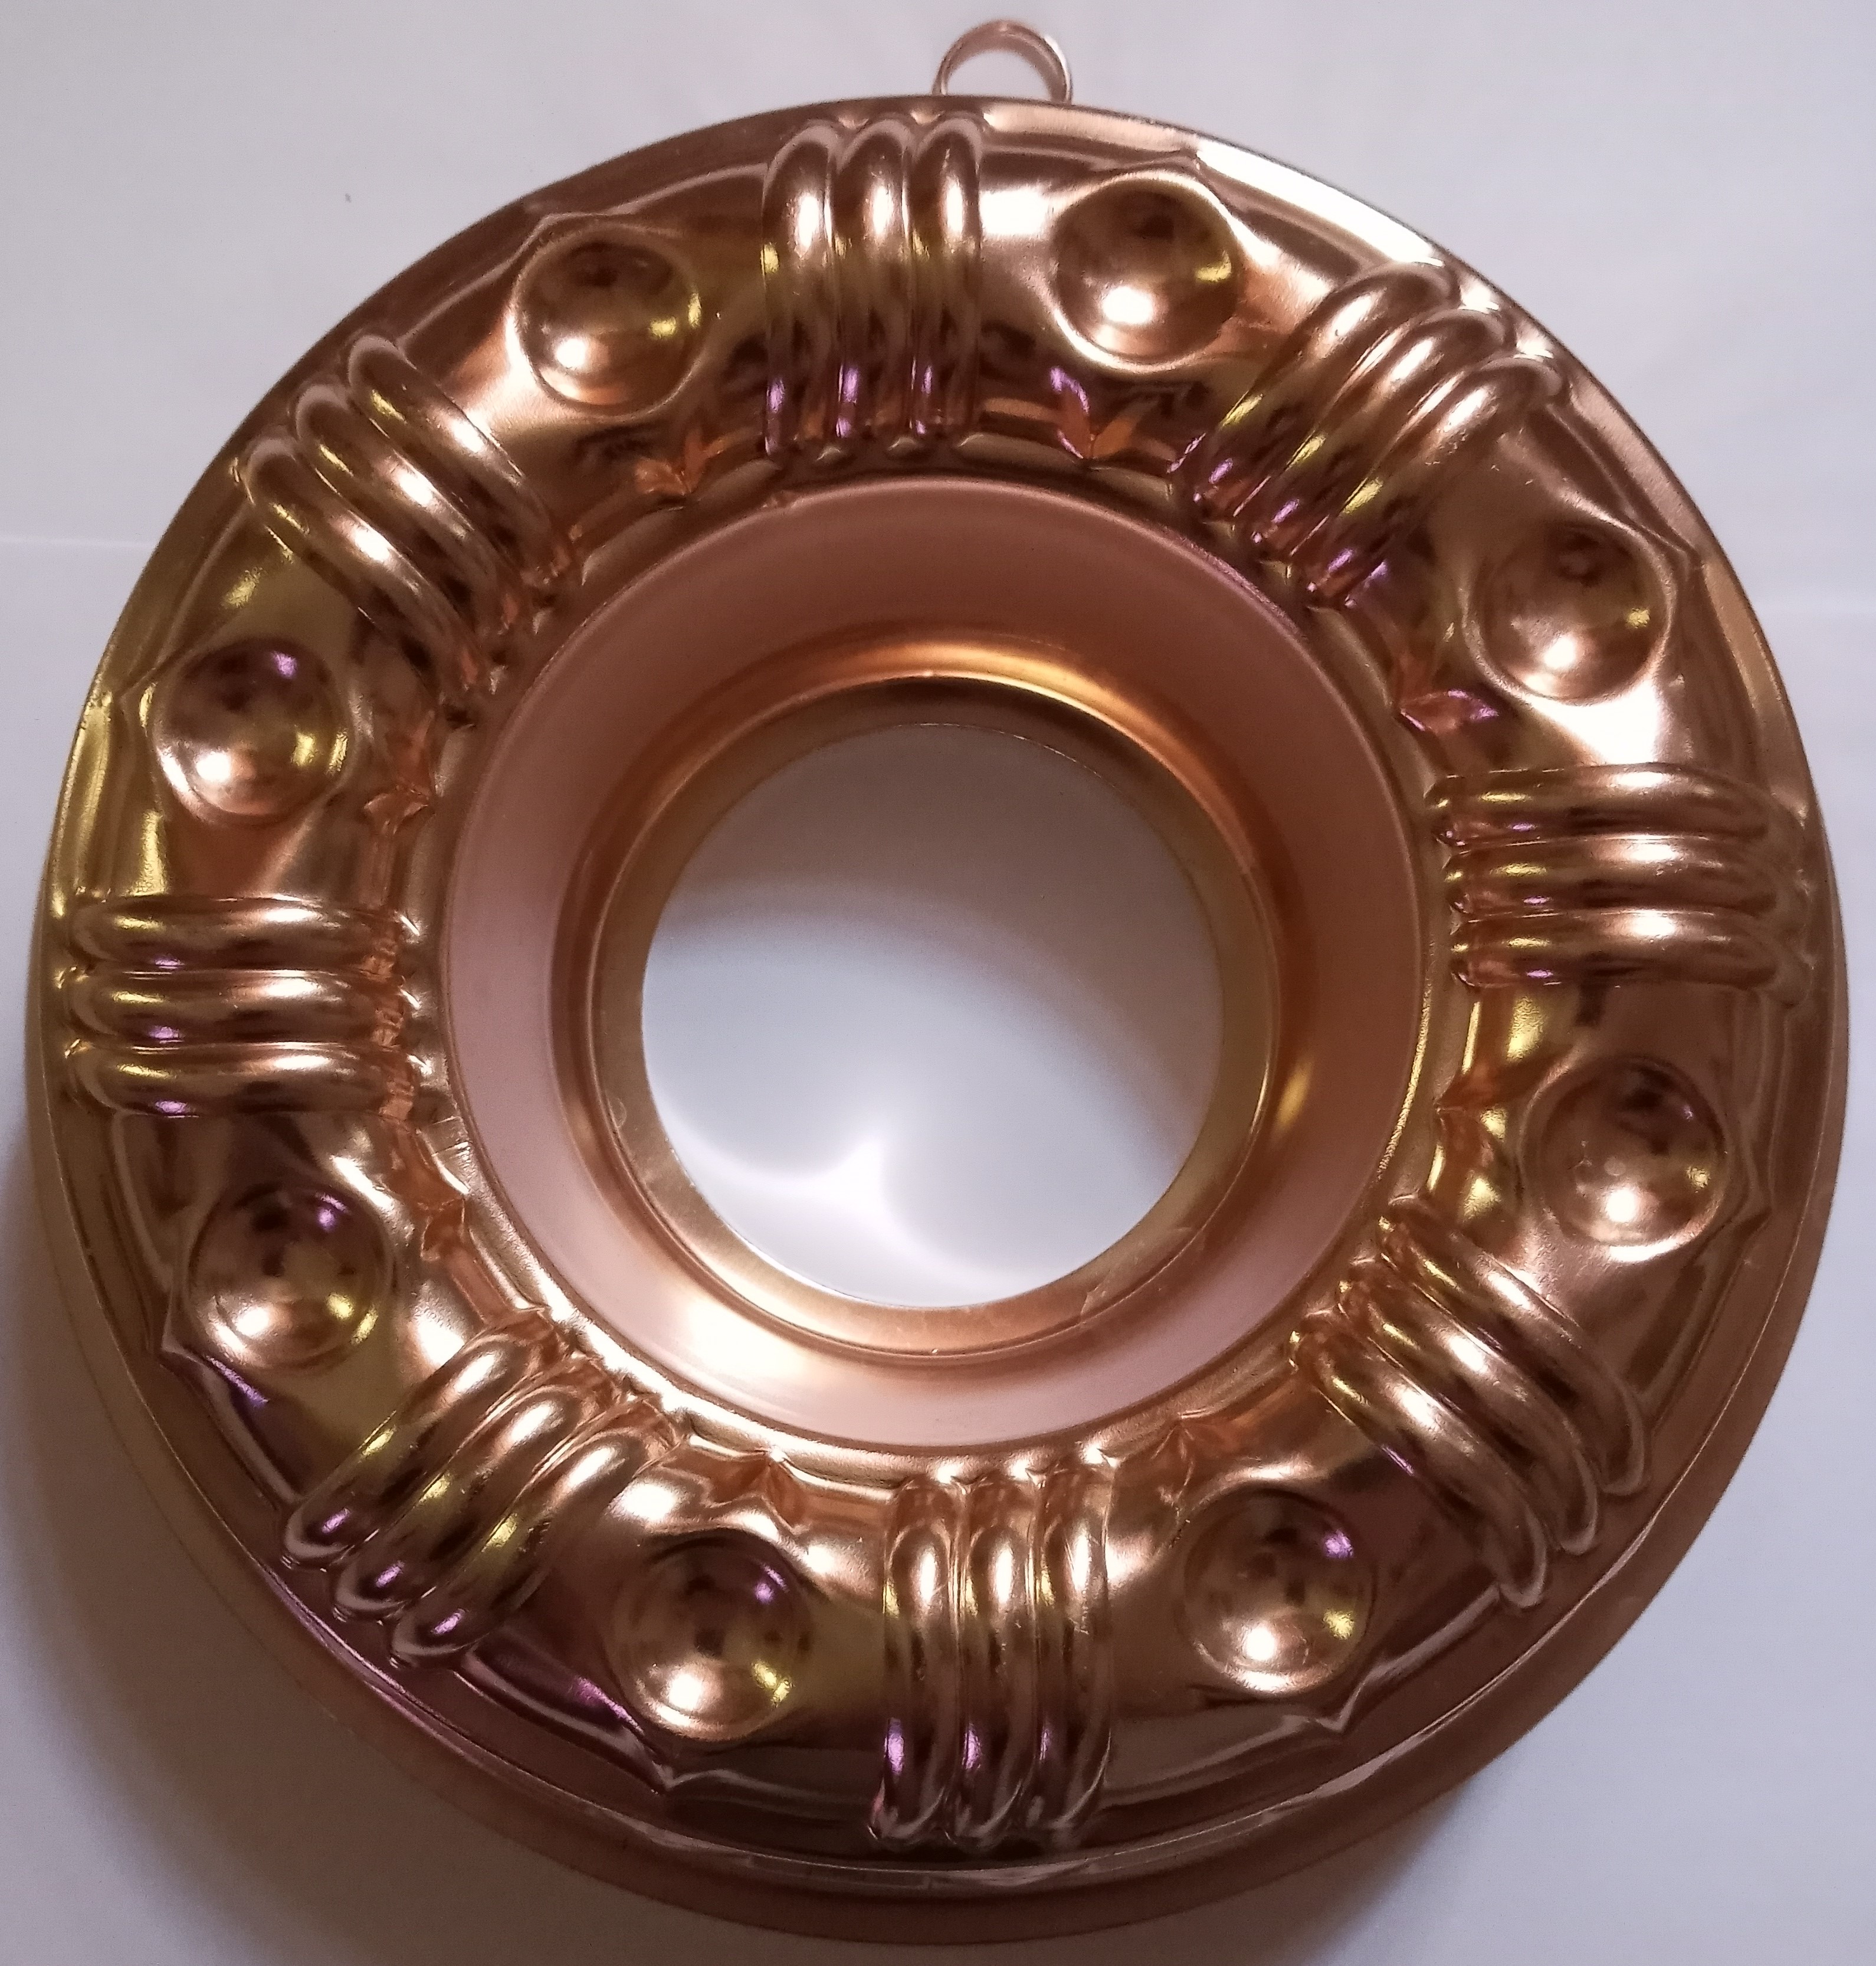 Image for Vintage Copper Toned Aluminum Gothic Wreath Jell-O Mold :  Round Bundt Pan Wreath Shape with Eight Circle Indentations